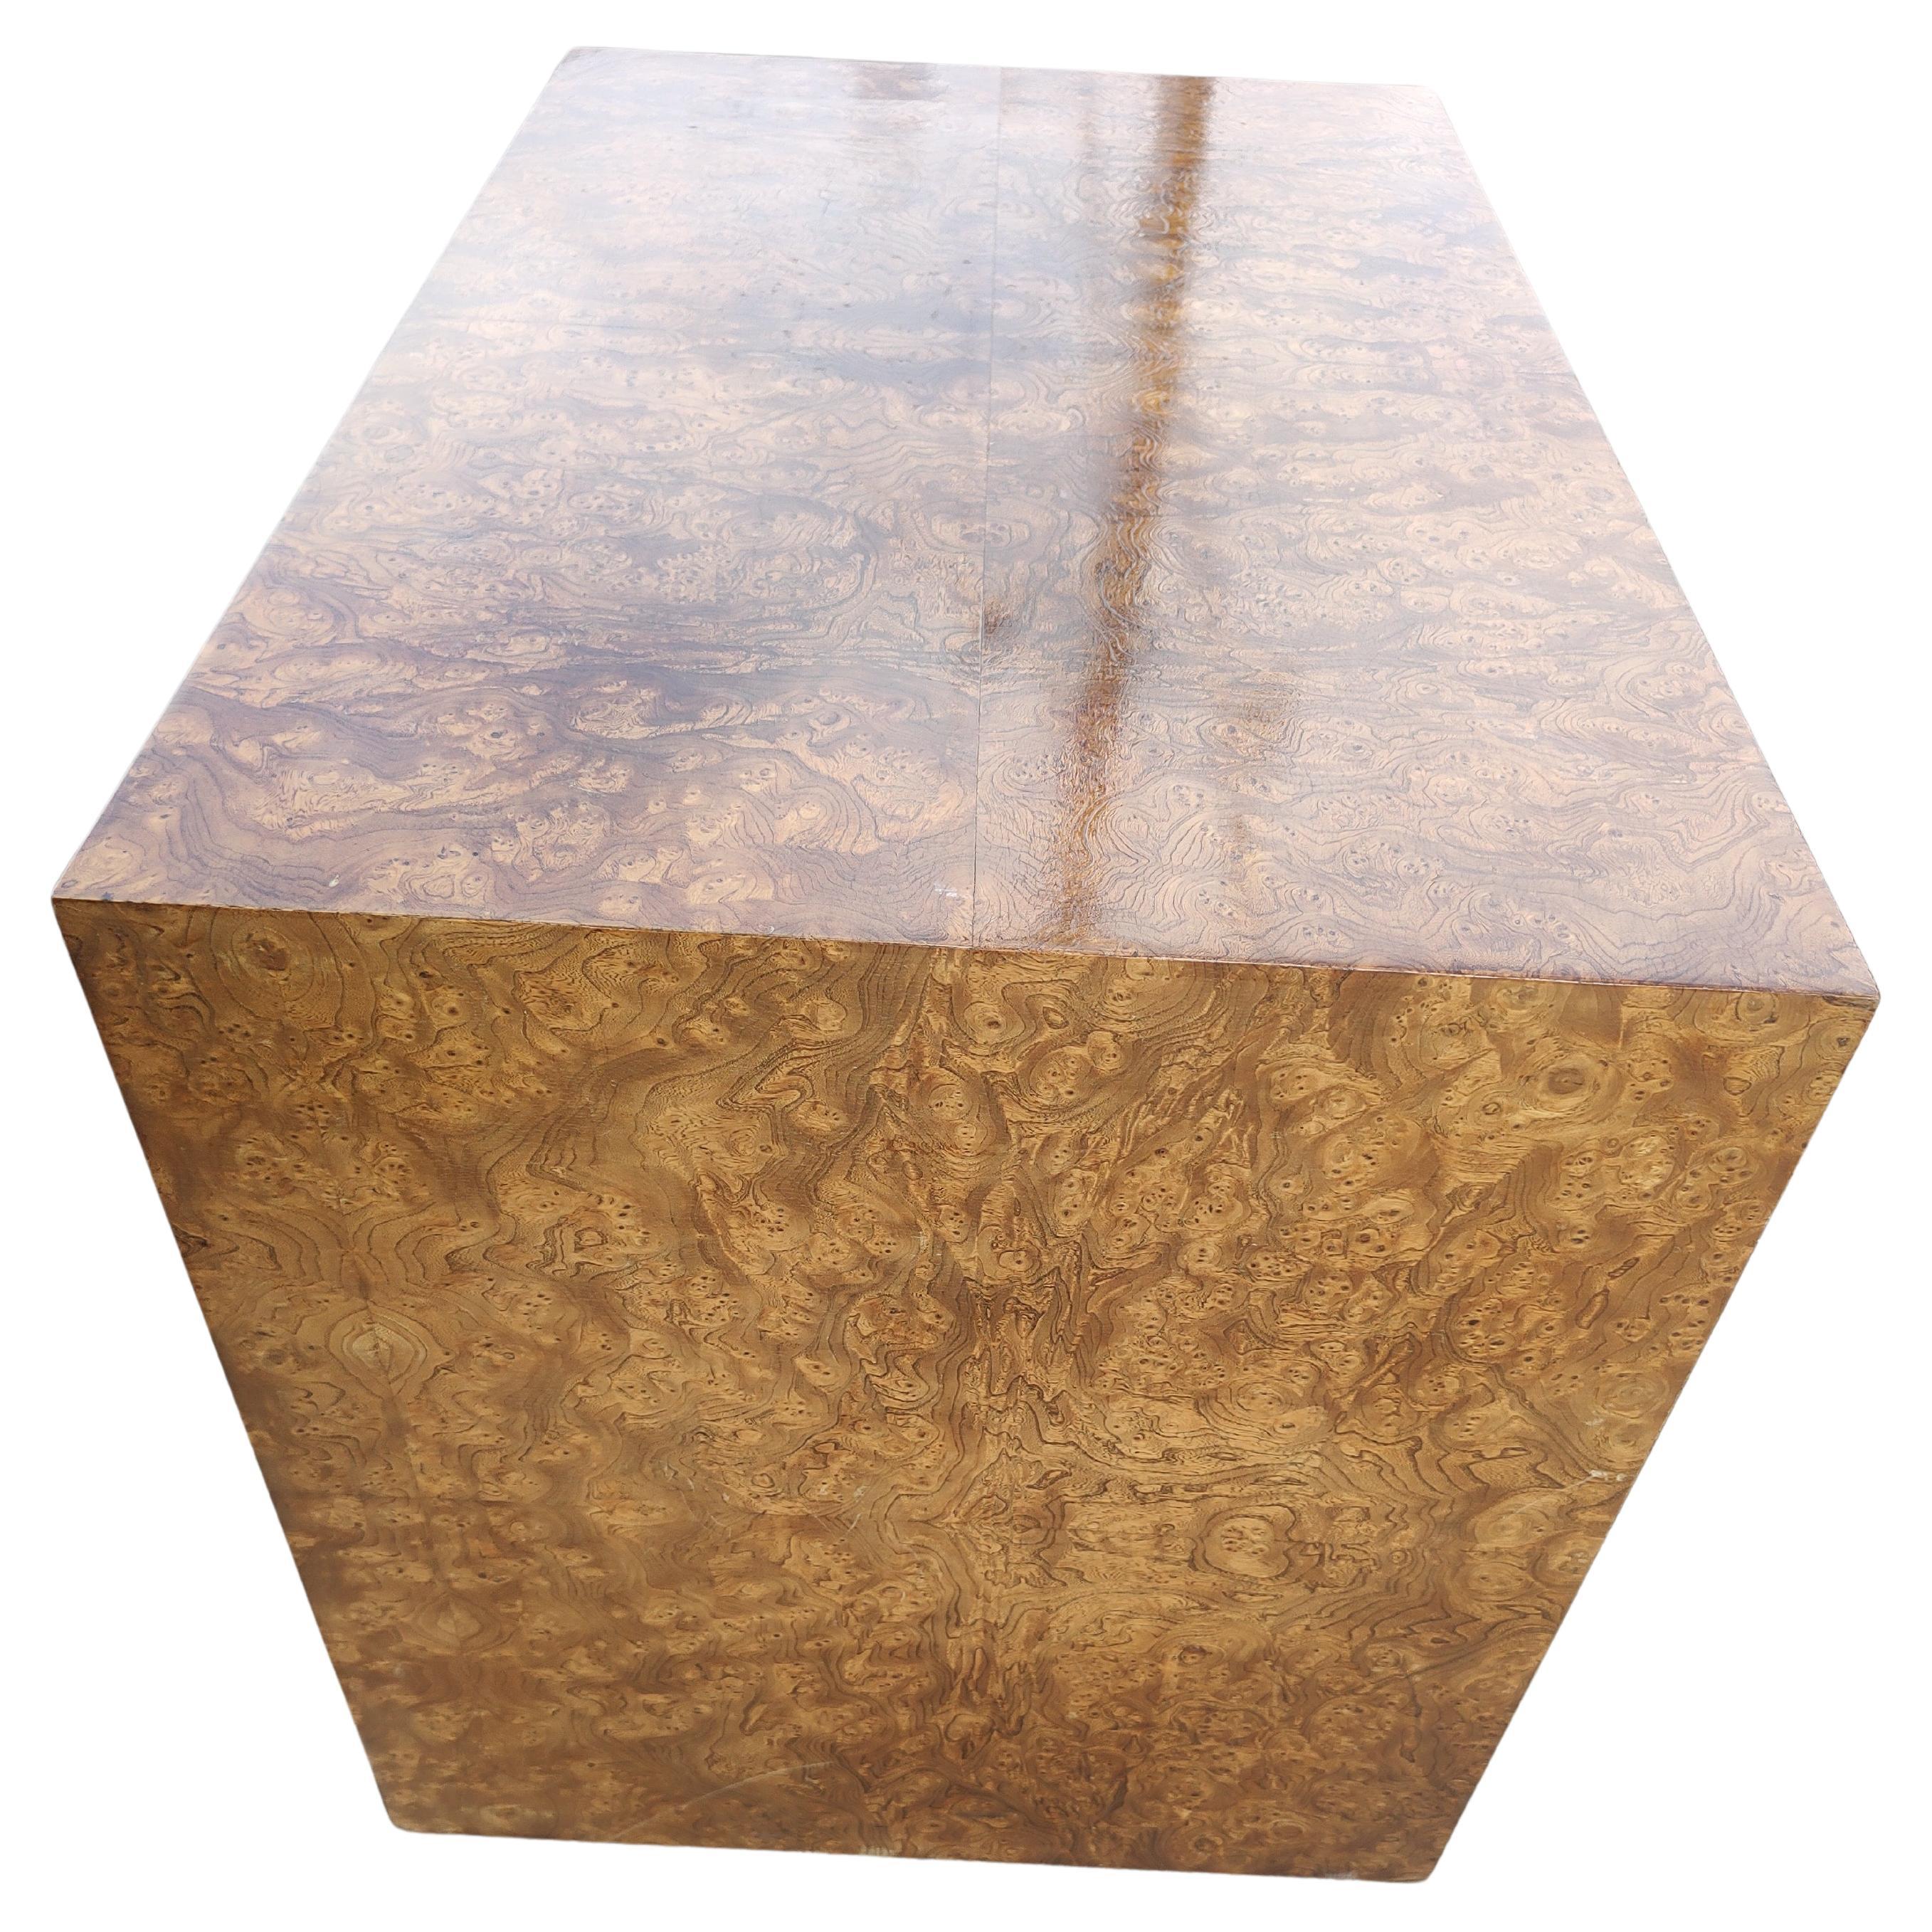 Spectacular burled olivewood rectangular end table with an architectural feature. An opening in the piece which completely passed from from side to side measuring 23 x 20 x 7H. Table itself is 33 x 20 x 22.75H. Perfect for a TV stand with room for